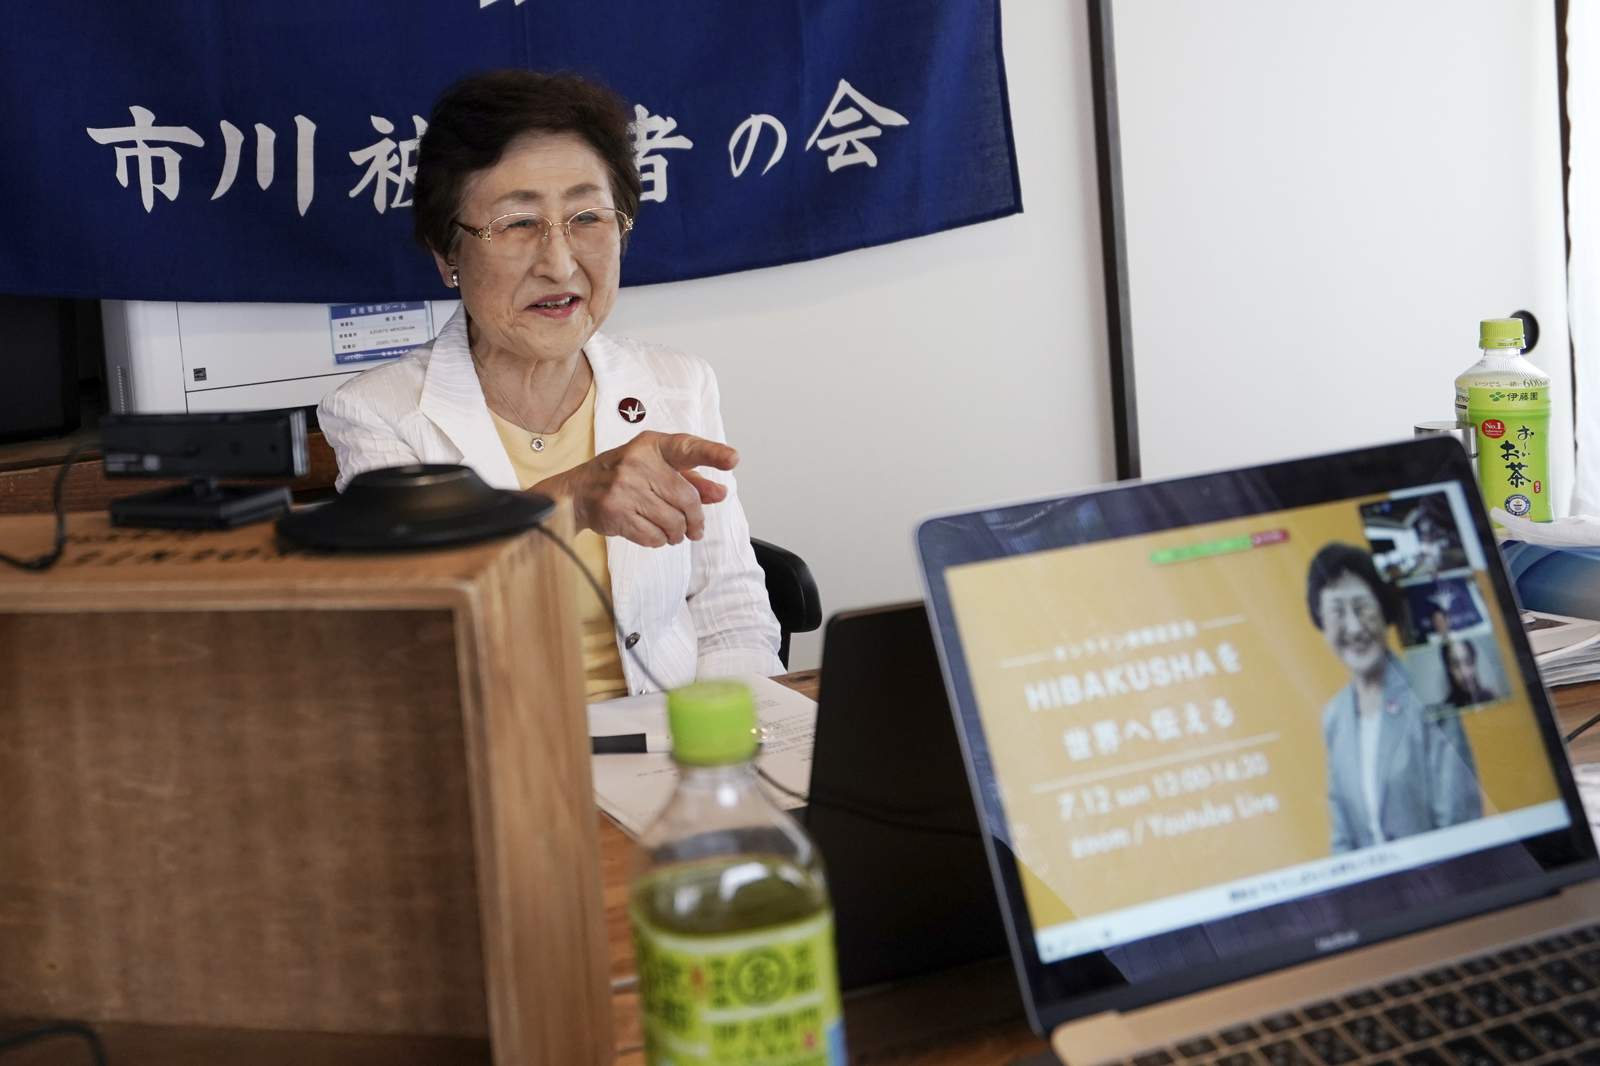 Urgency to bear witness grows for last Hiroshima victims